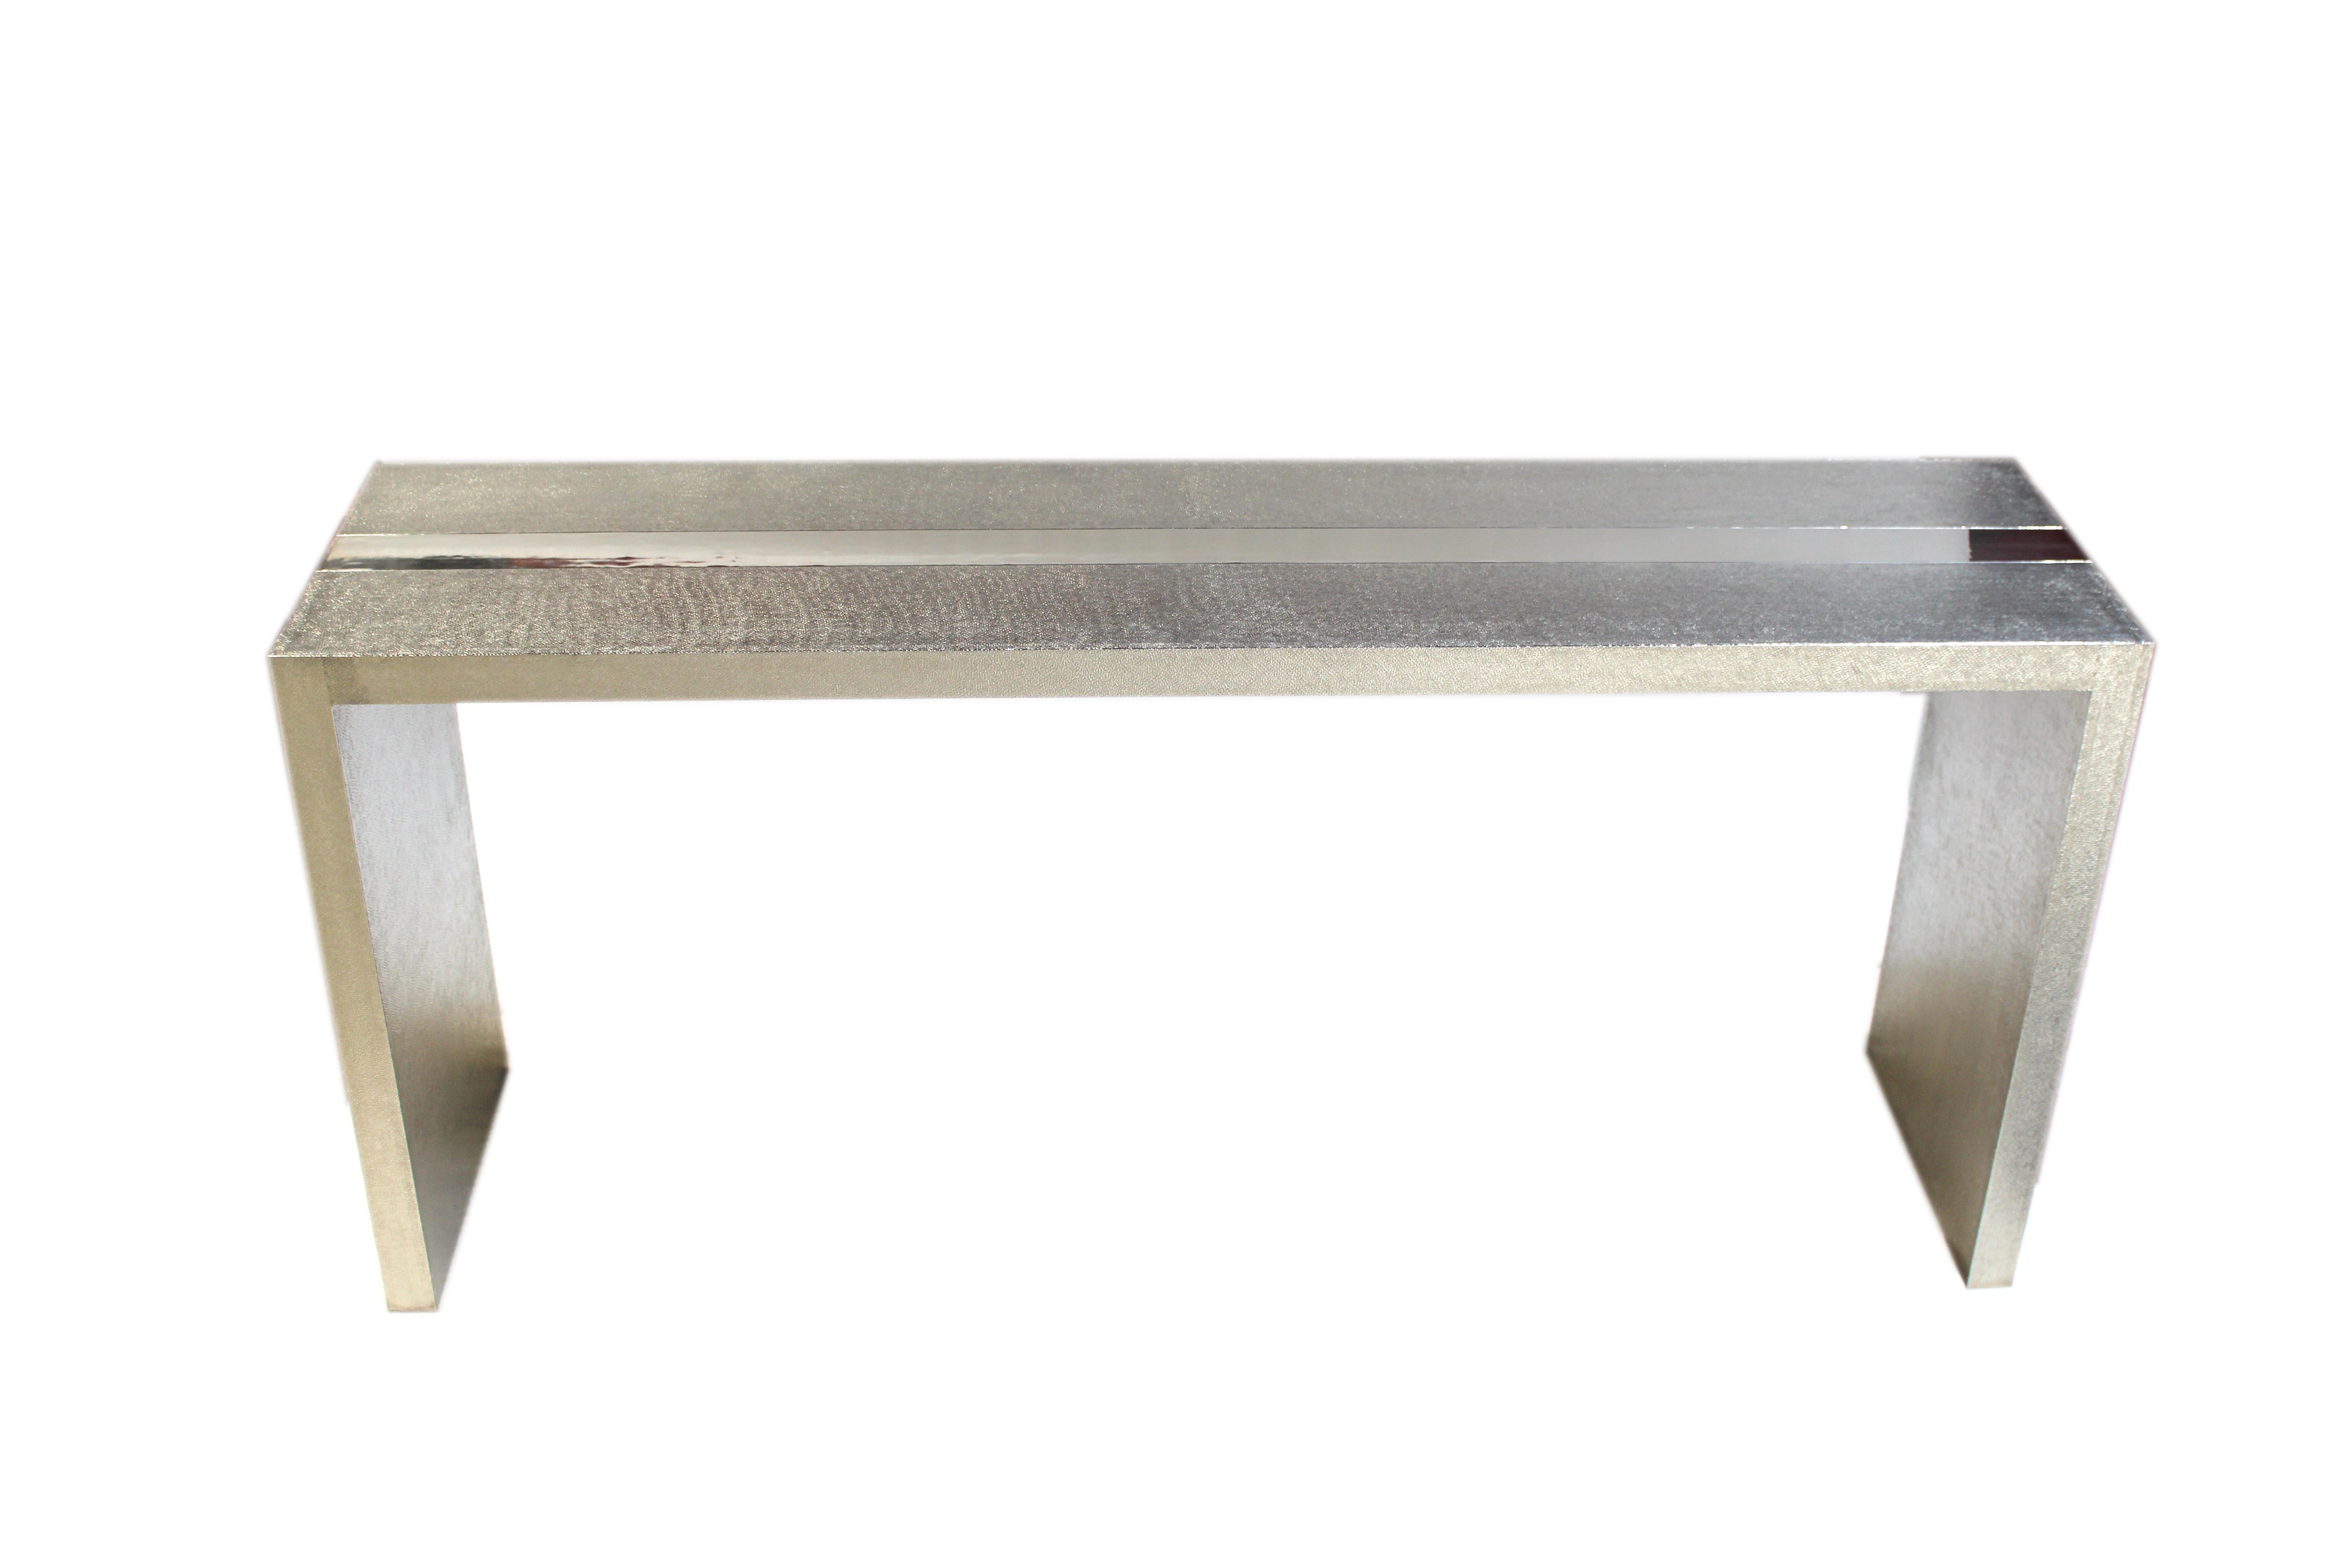 Art Deco Rectangular Console Tables Mid. Hammered Brass by Alison Spear For Sale 7